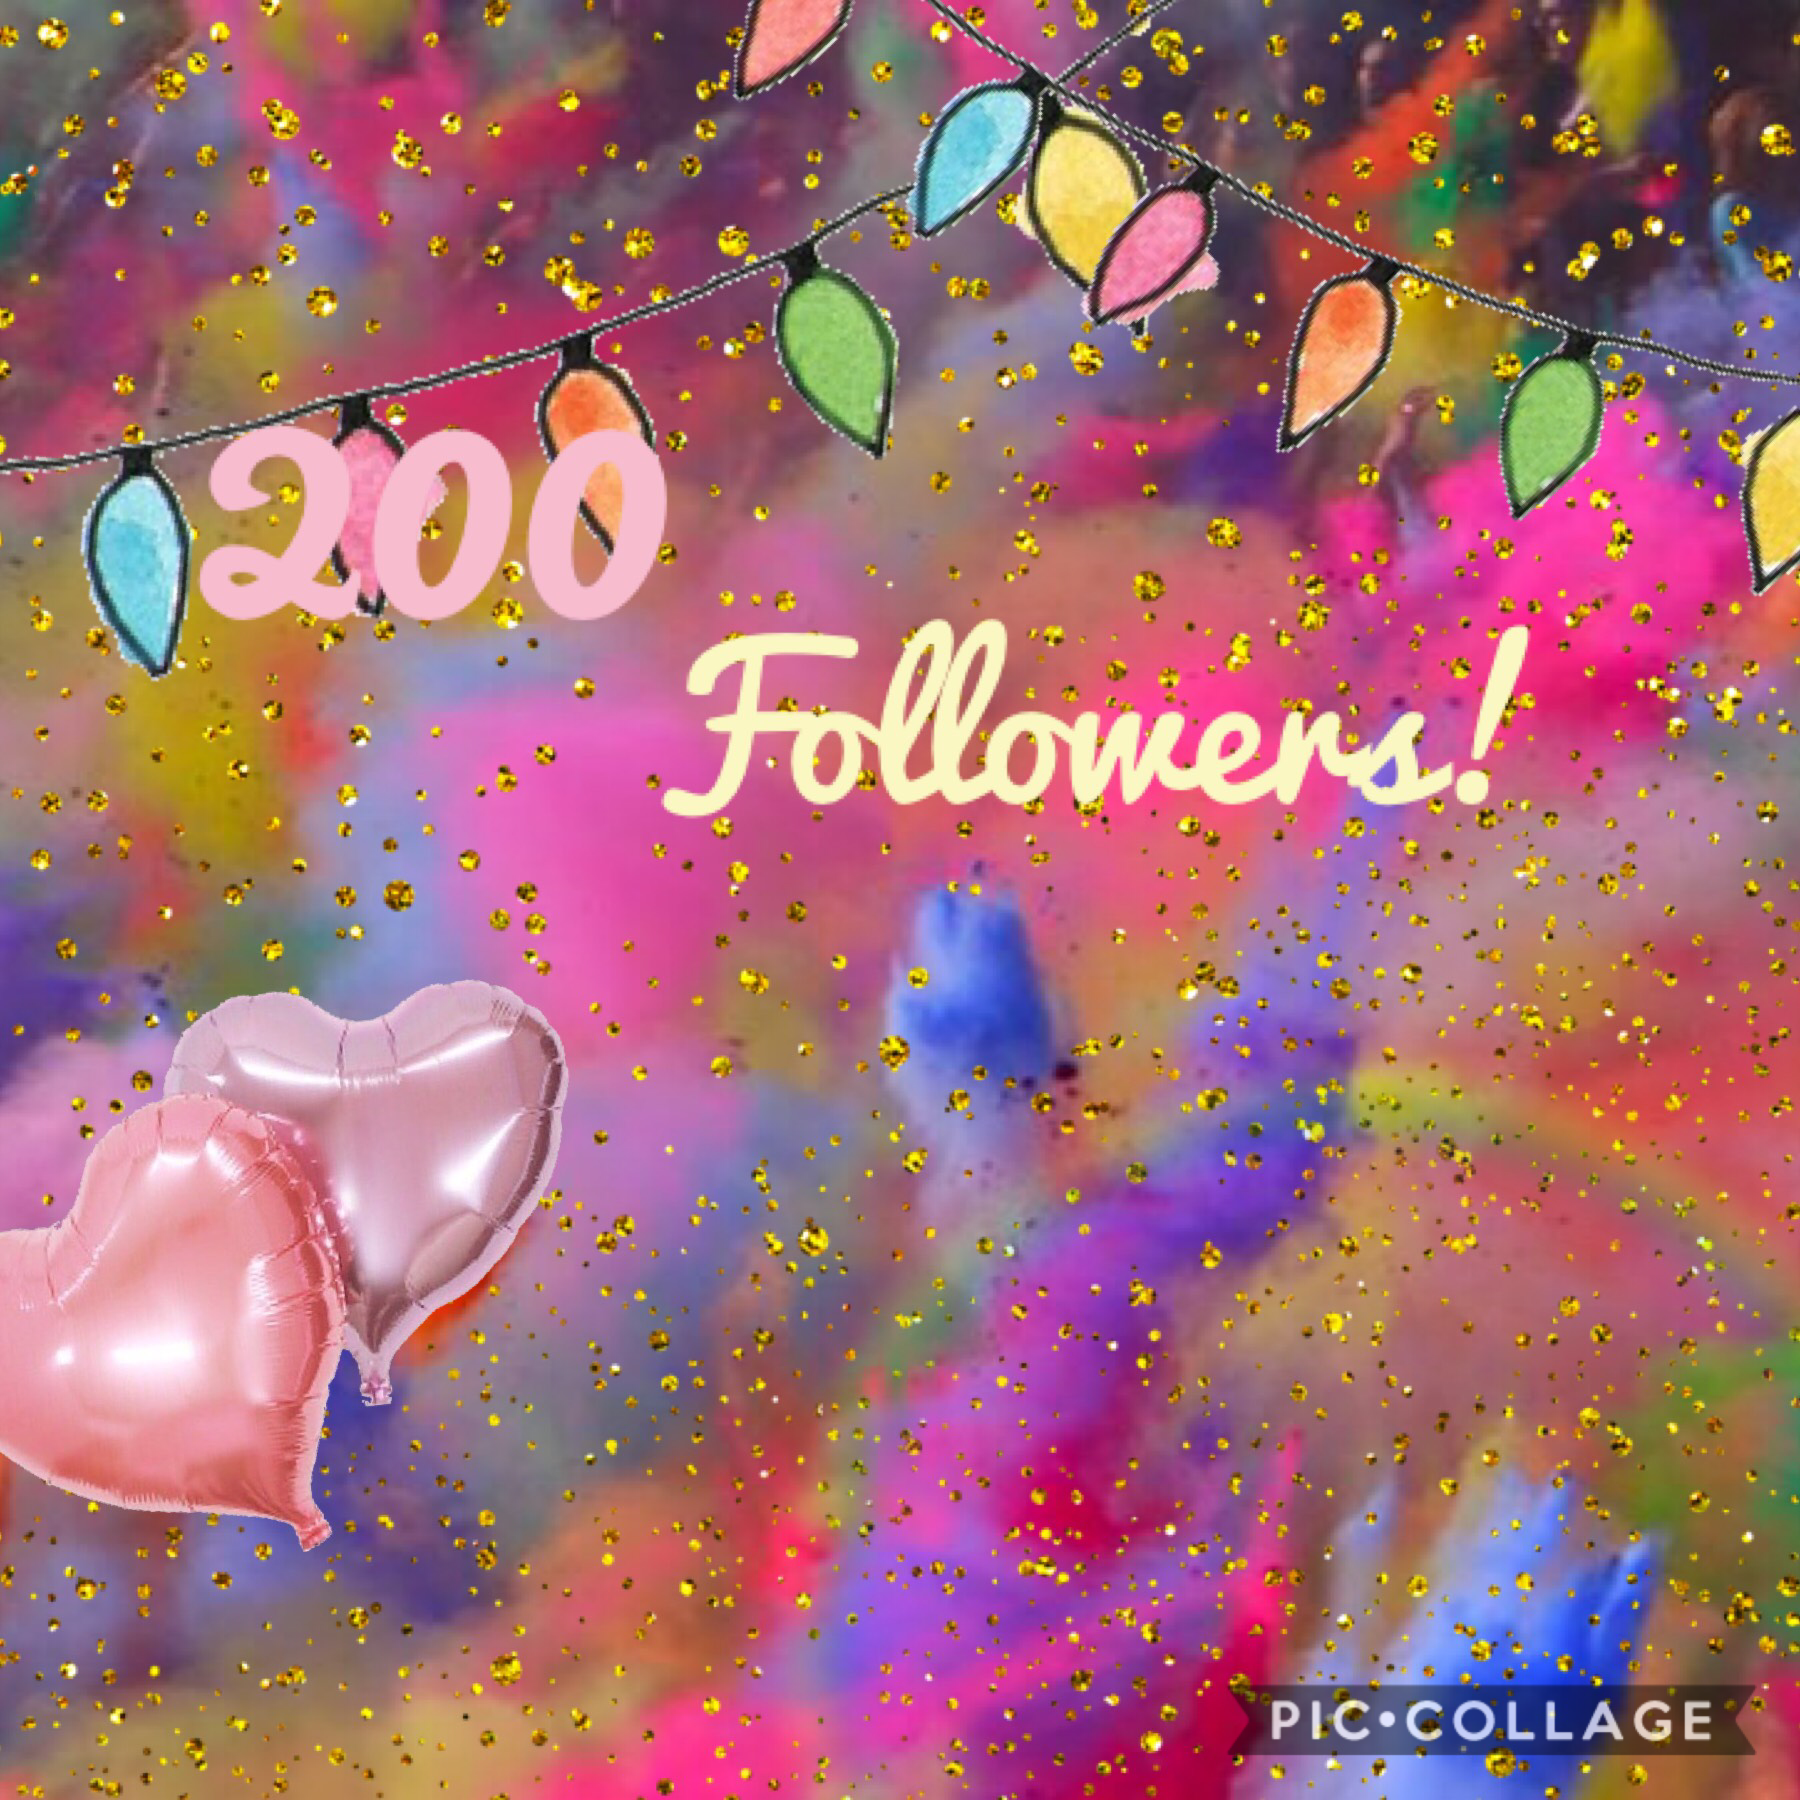 🎉Tap!🎉
💕THANK YOU SO MUCH for 200 followers! I can’t say how much I’m grateful of this celebration. Thank you to all my followers.💕
🌻PS: future collages and maybe competitions will come in the future 😏